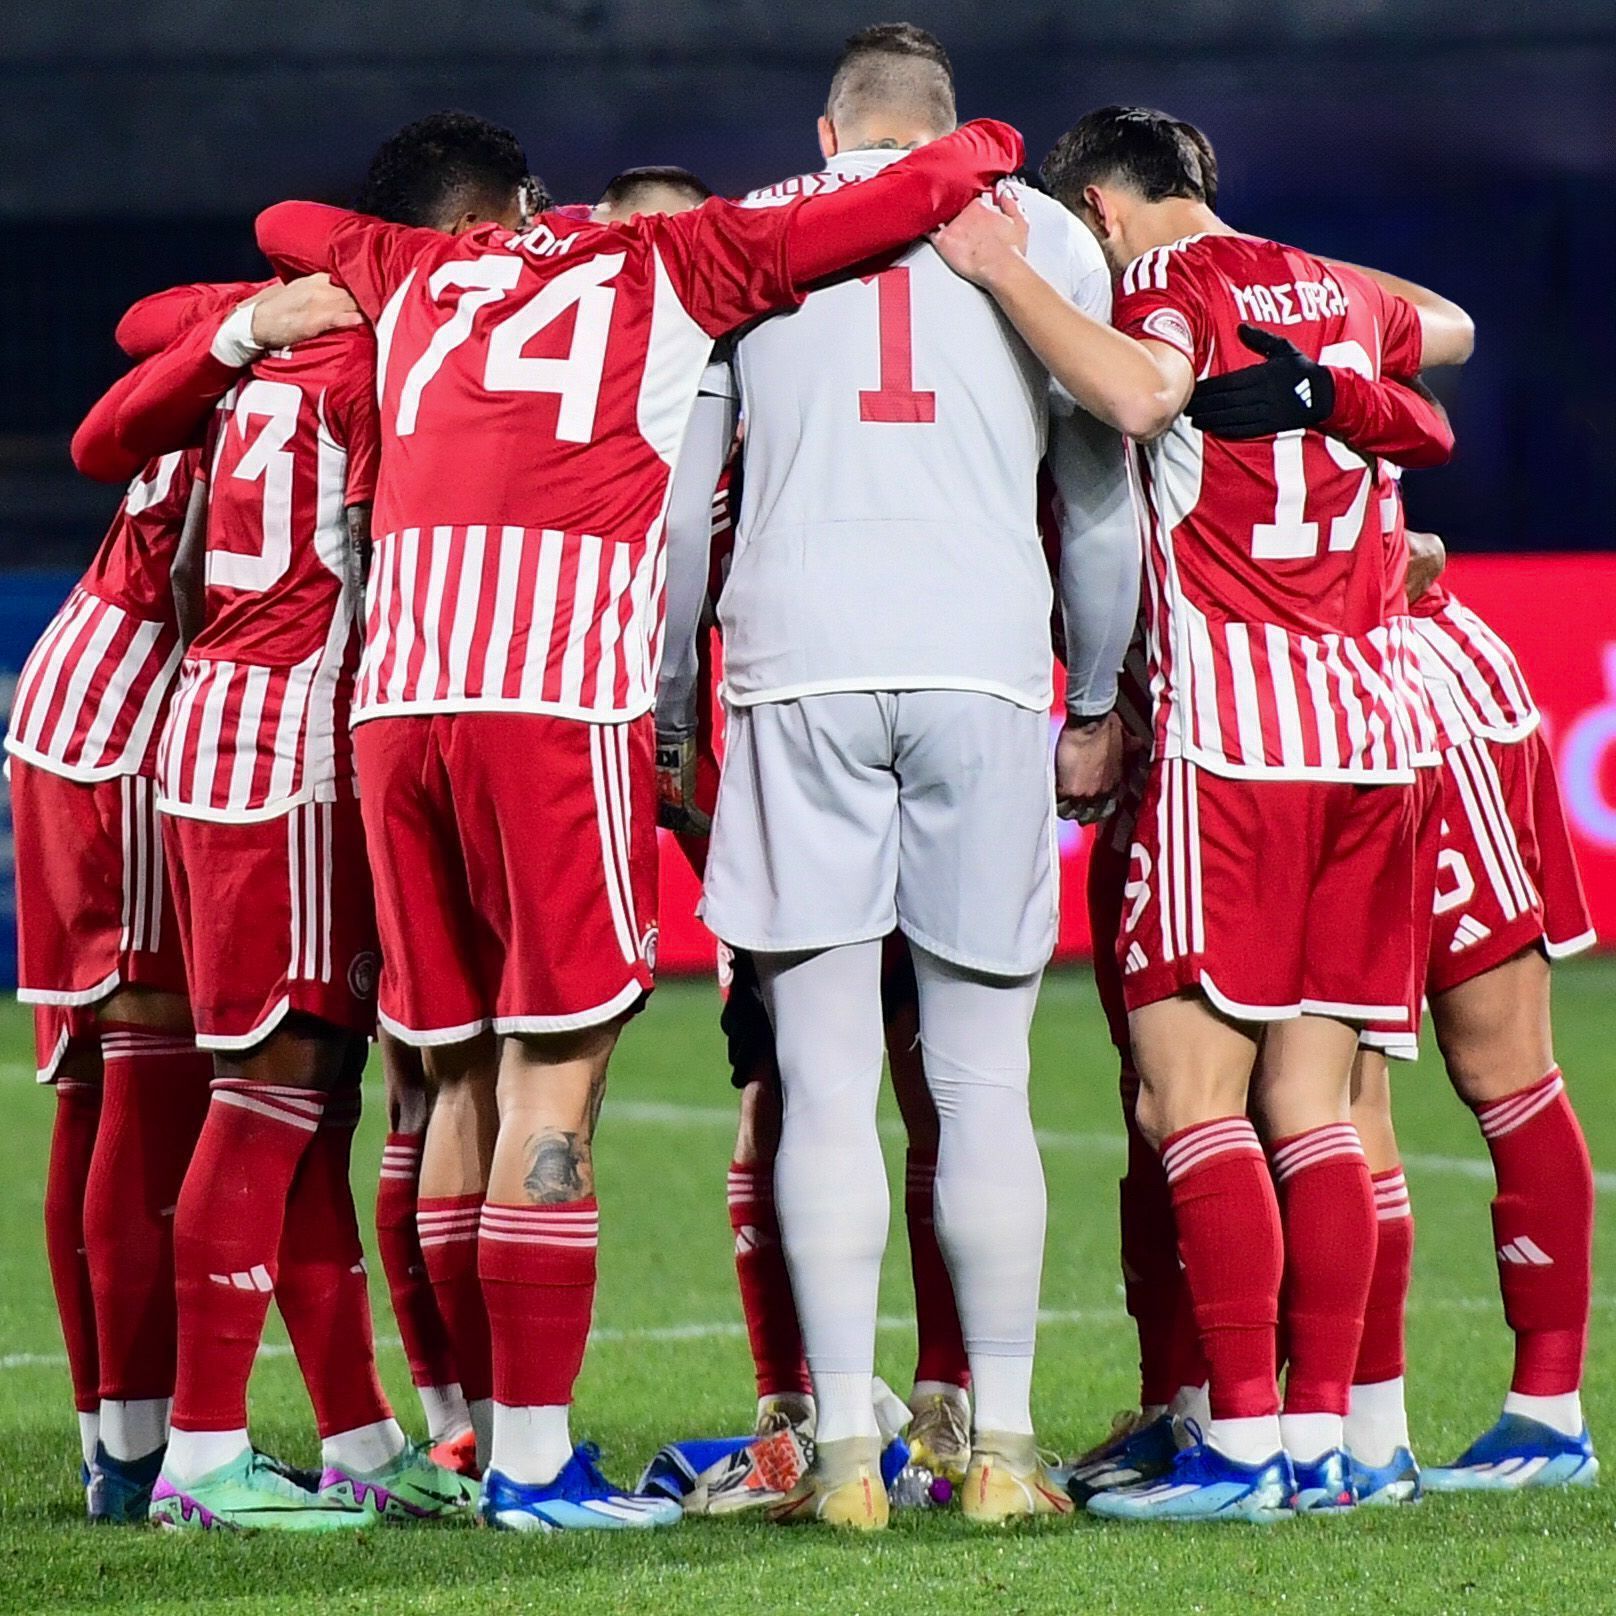 Olympiacos will face Volos on Sunday 